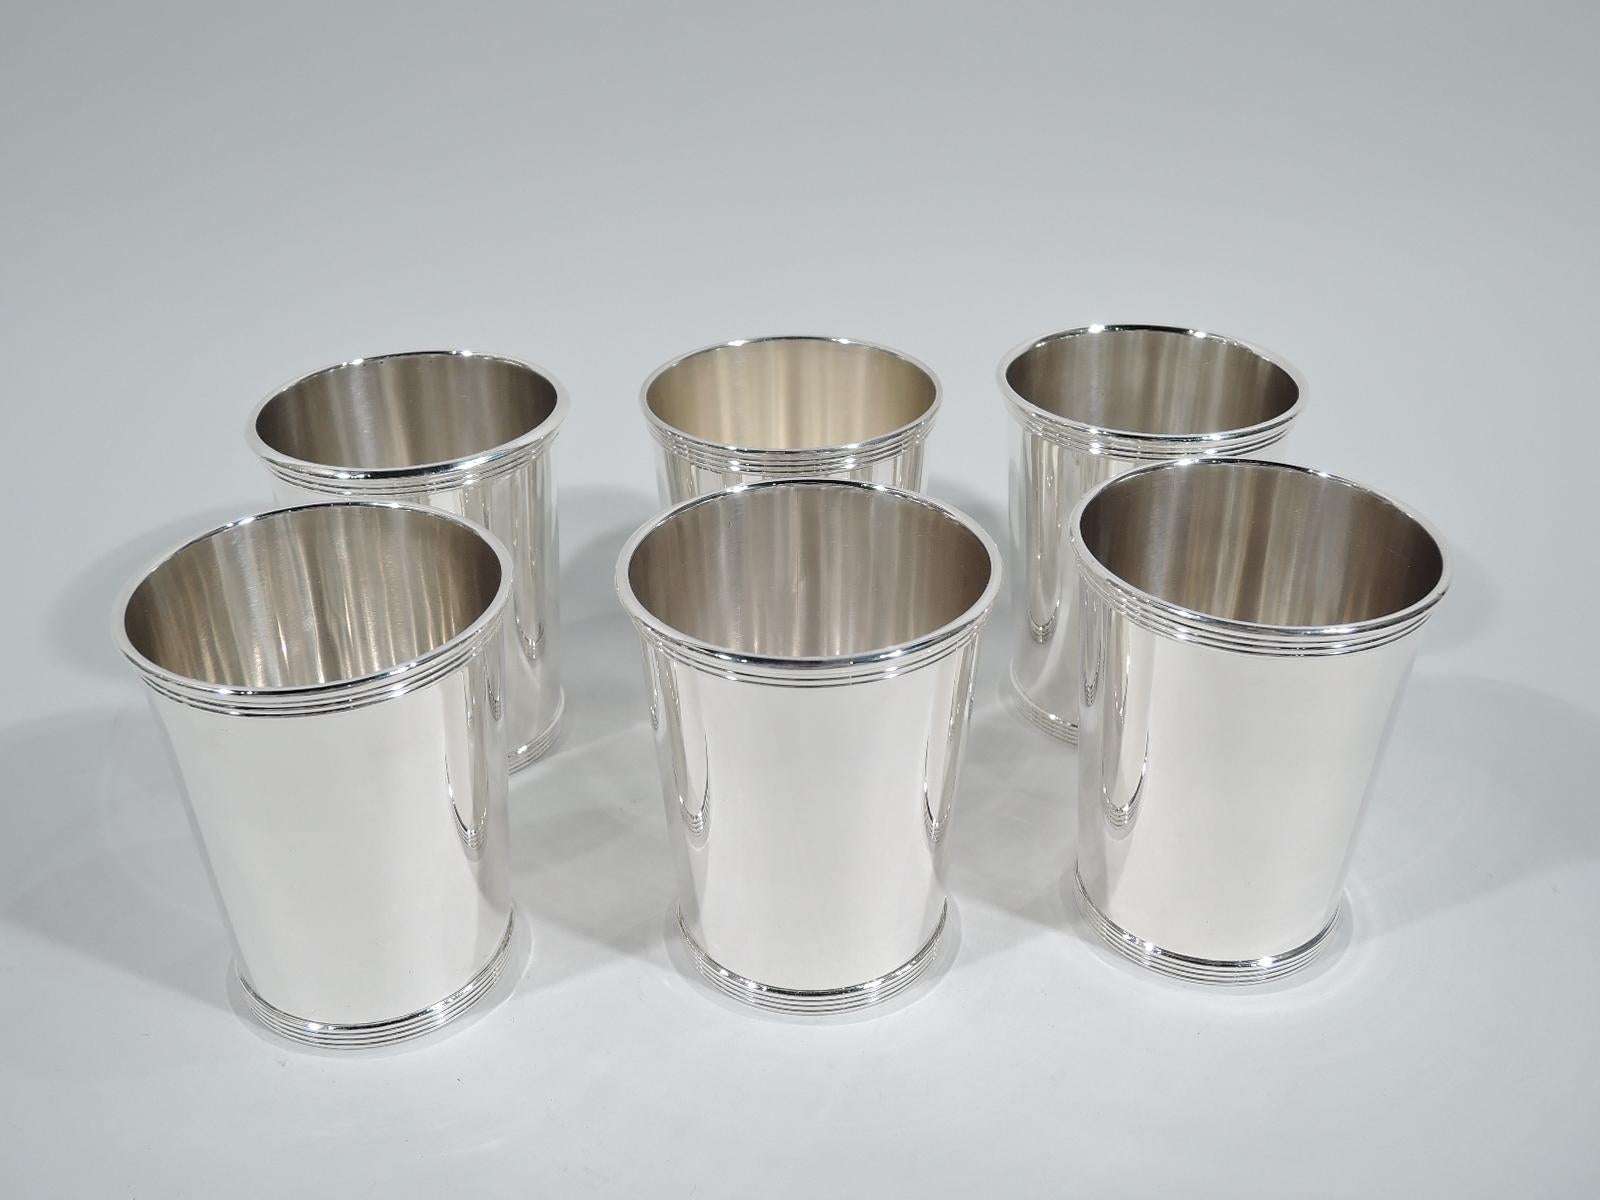 Set of 6 traditional sterling silver mint julep cups. Made by Alvin in Providence. Each: Straight and tapering sides, and reeded rim and base. Fully marked and numbered S251. Total weight: 22.5 troy ounces.